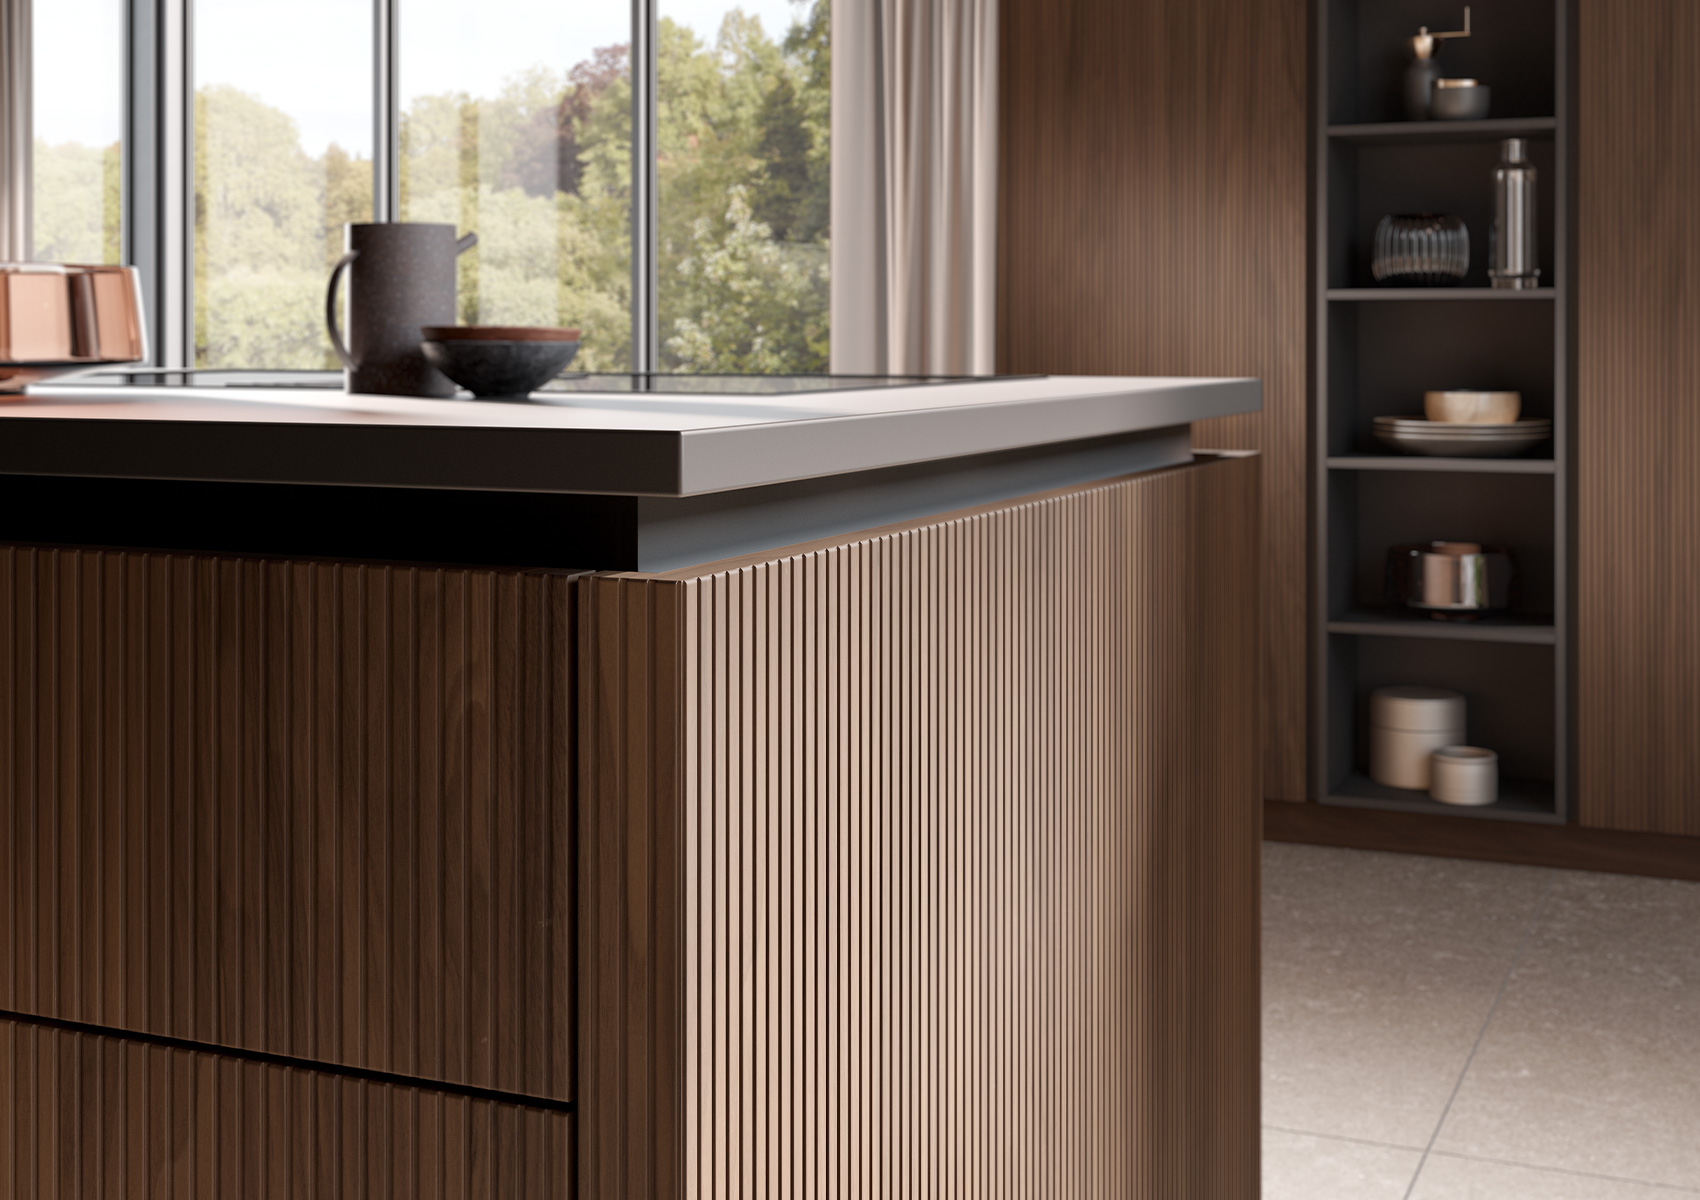 Detail picture of the special grooved fronts of elegant walnut.